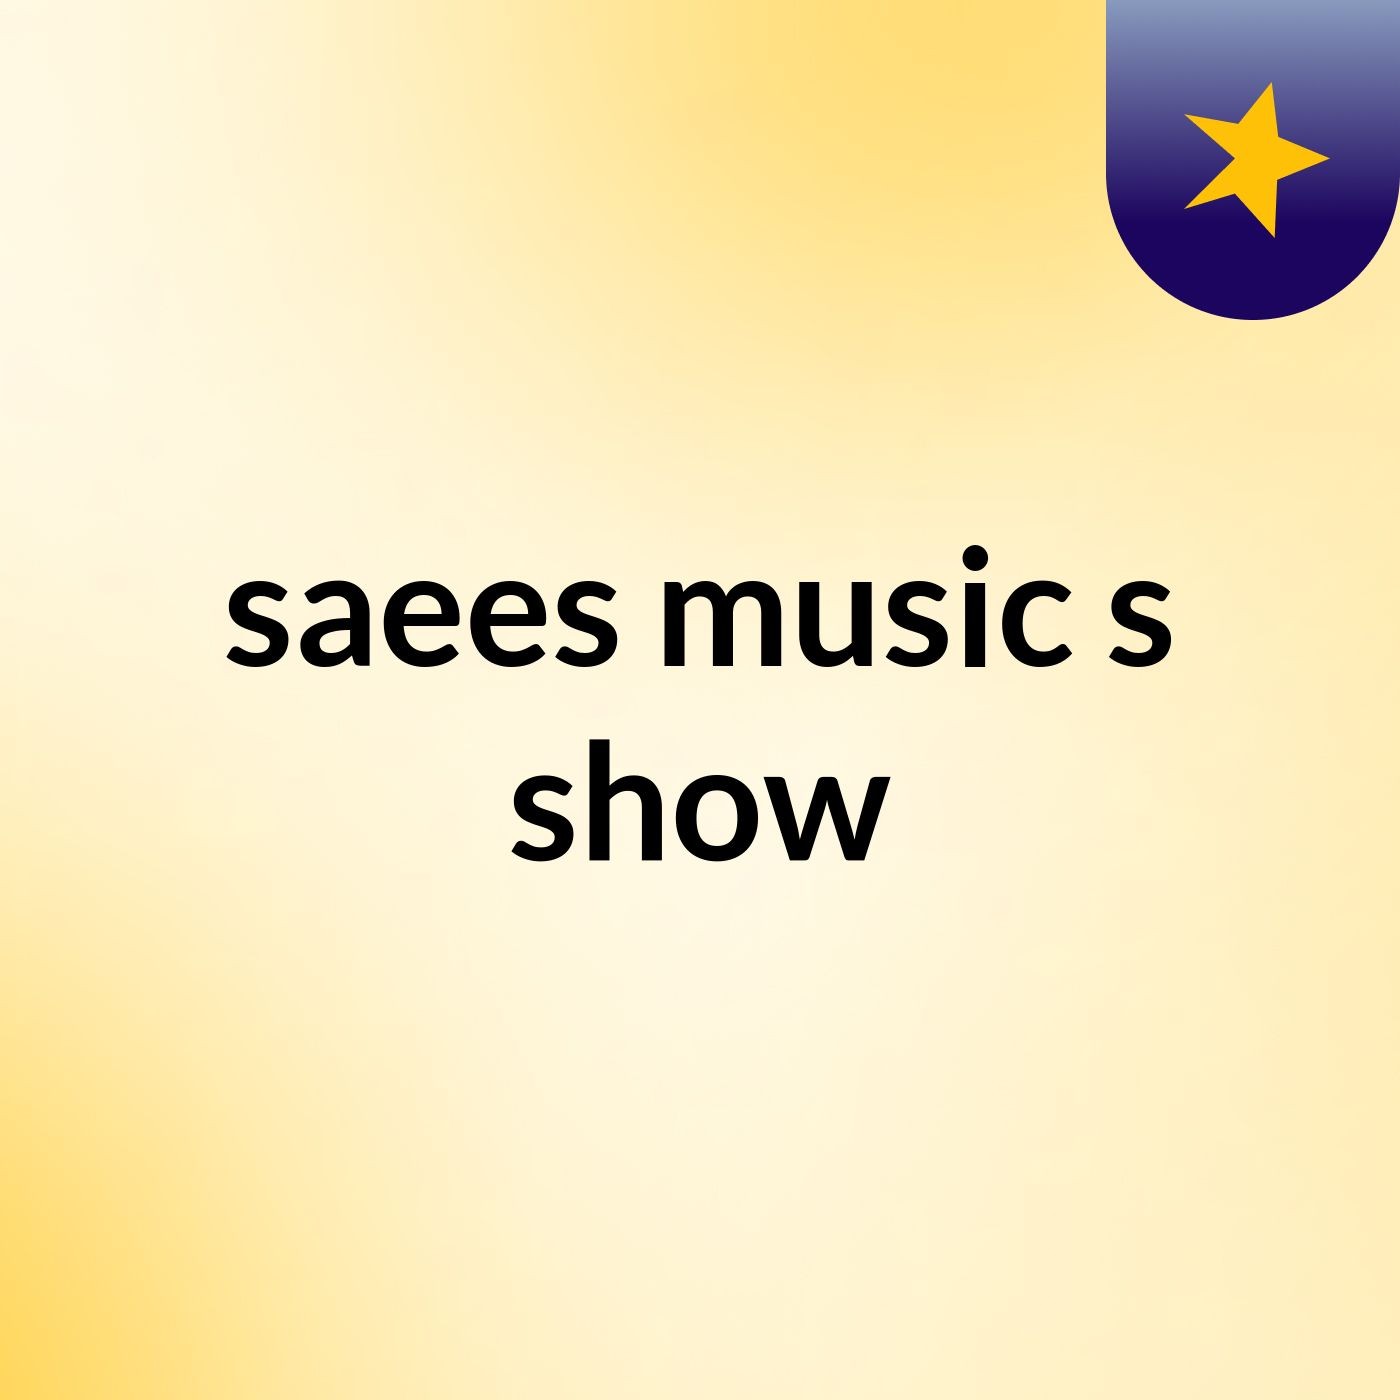 saees music's show